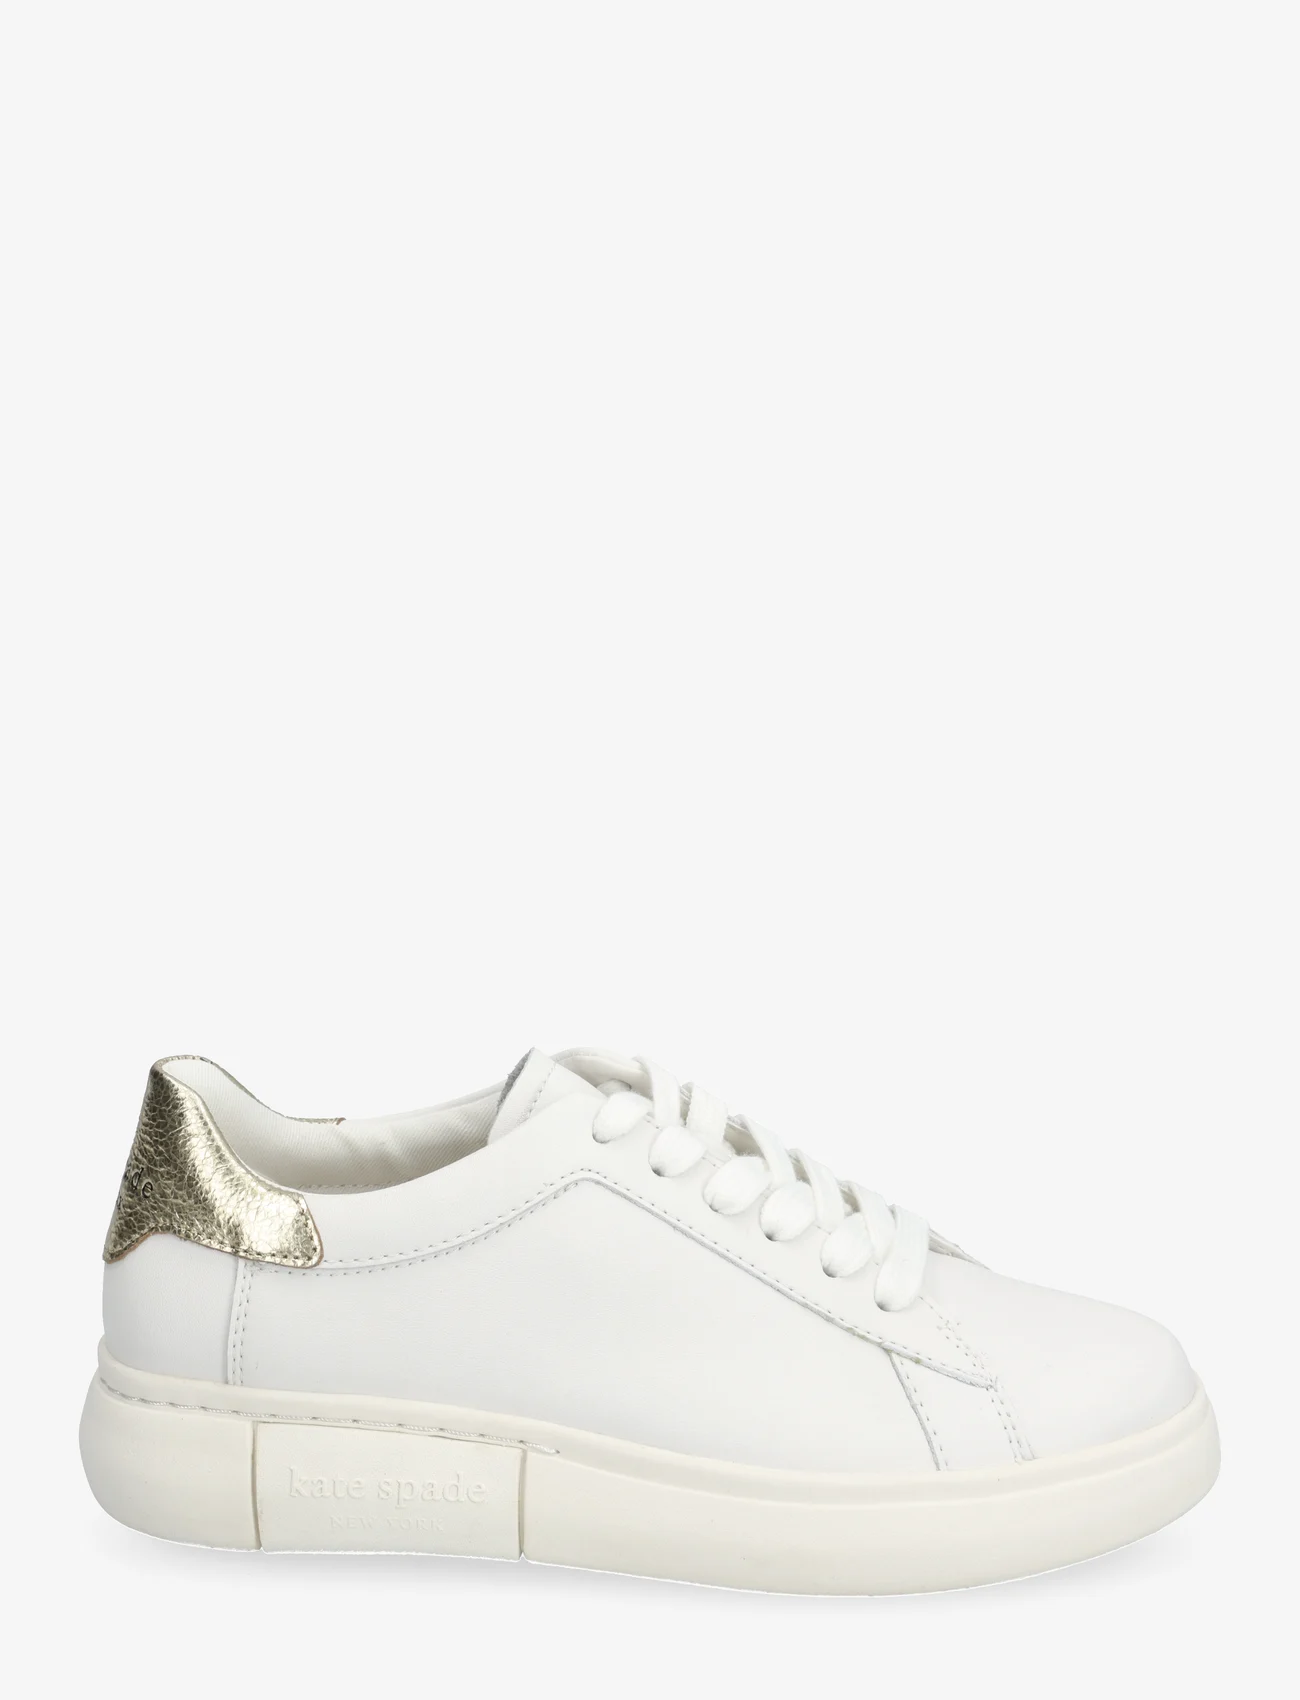 Kate Spade - LIFT - lave sneakers - optic white/pale gold - 1